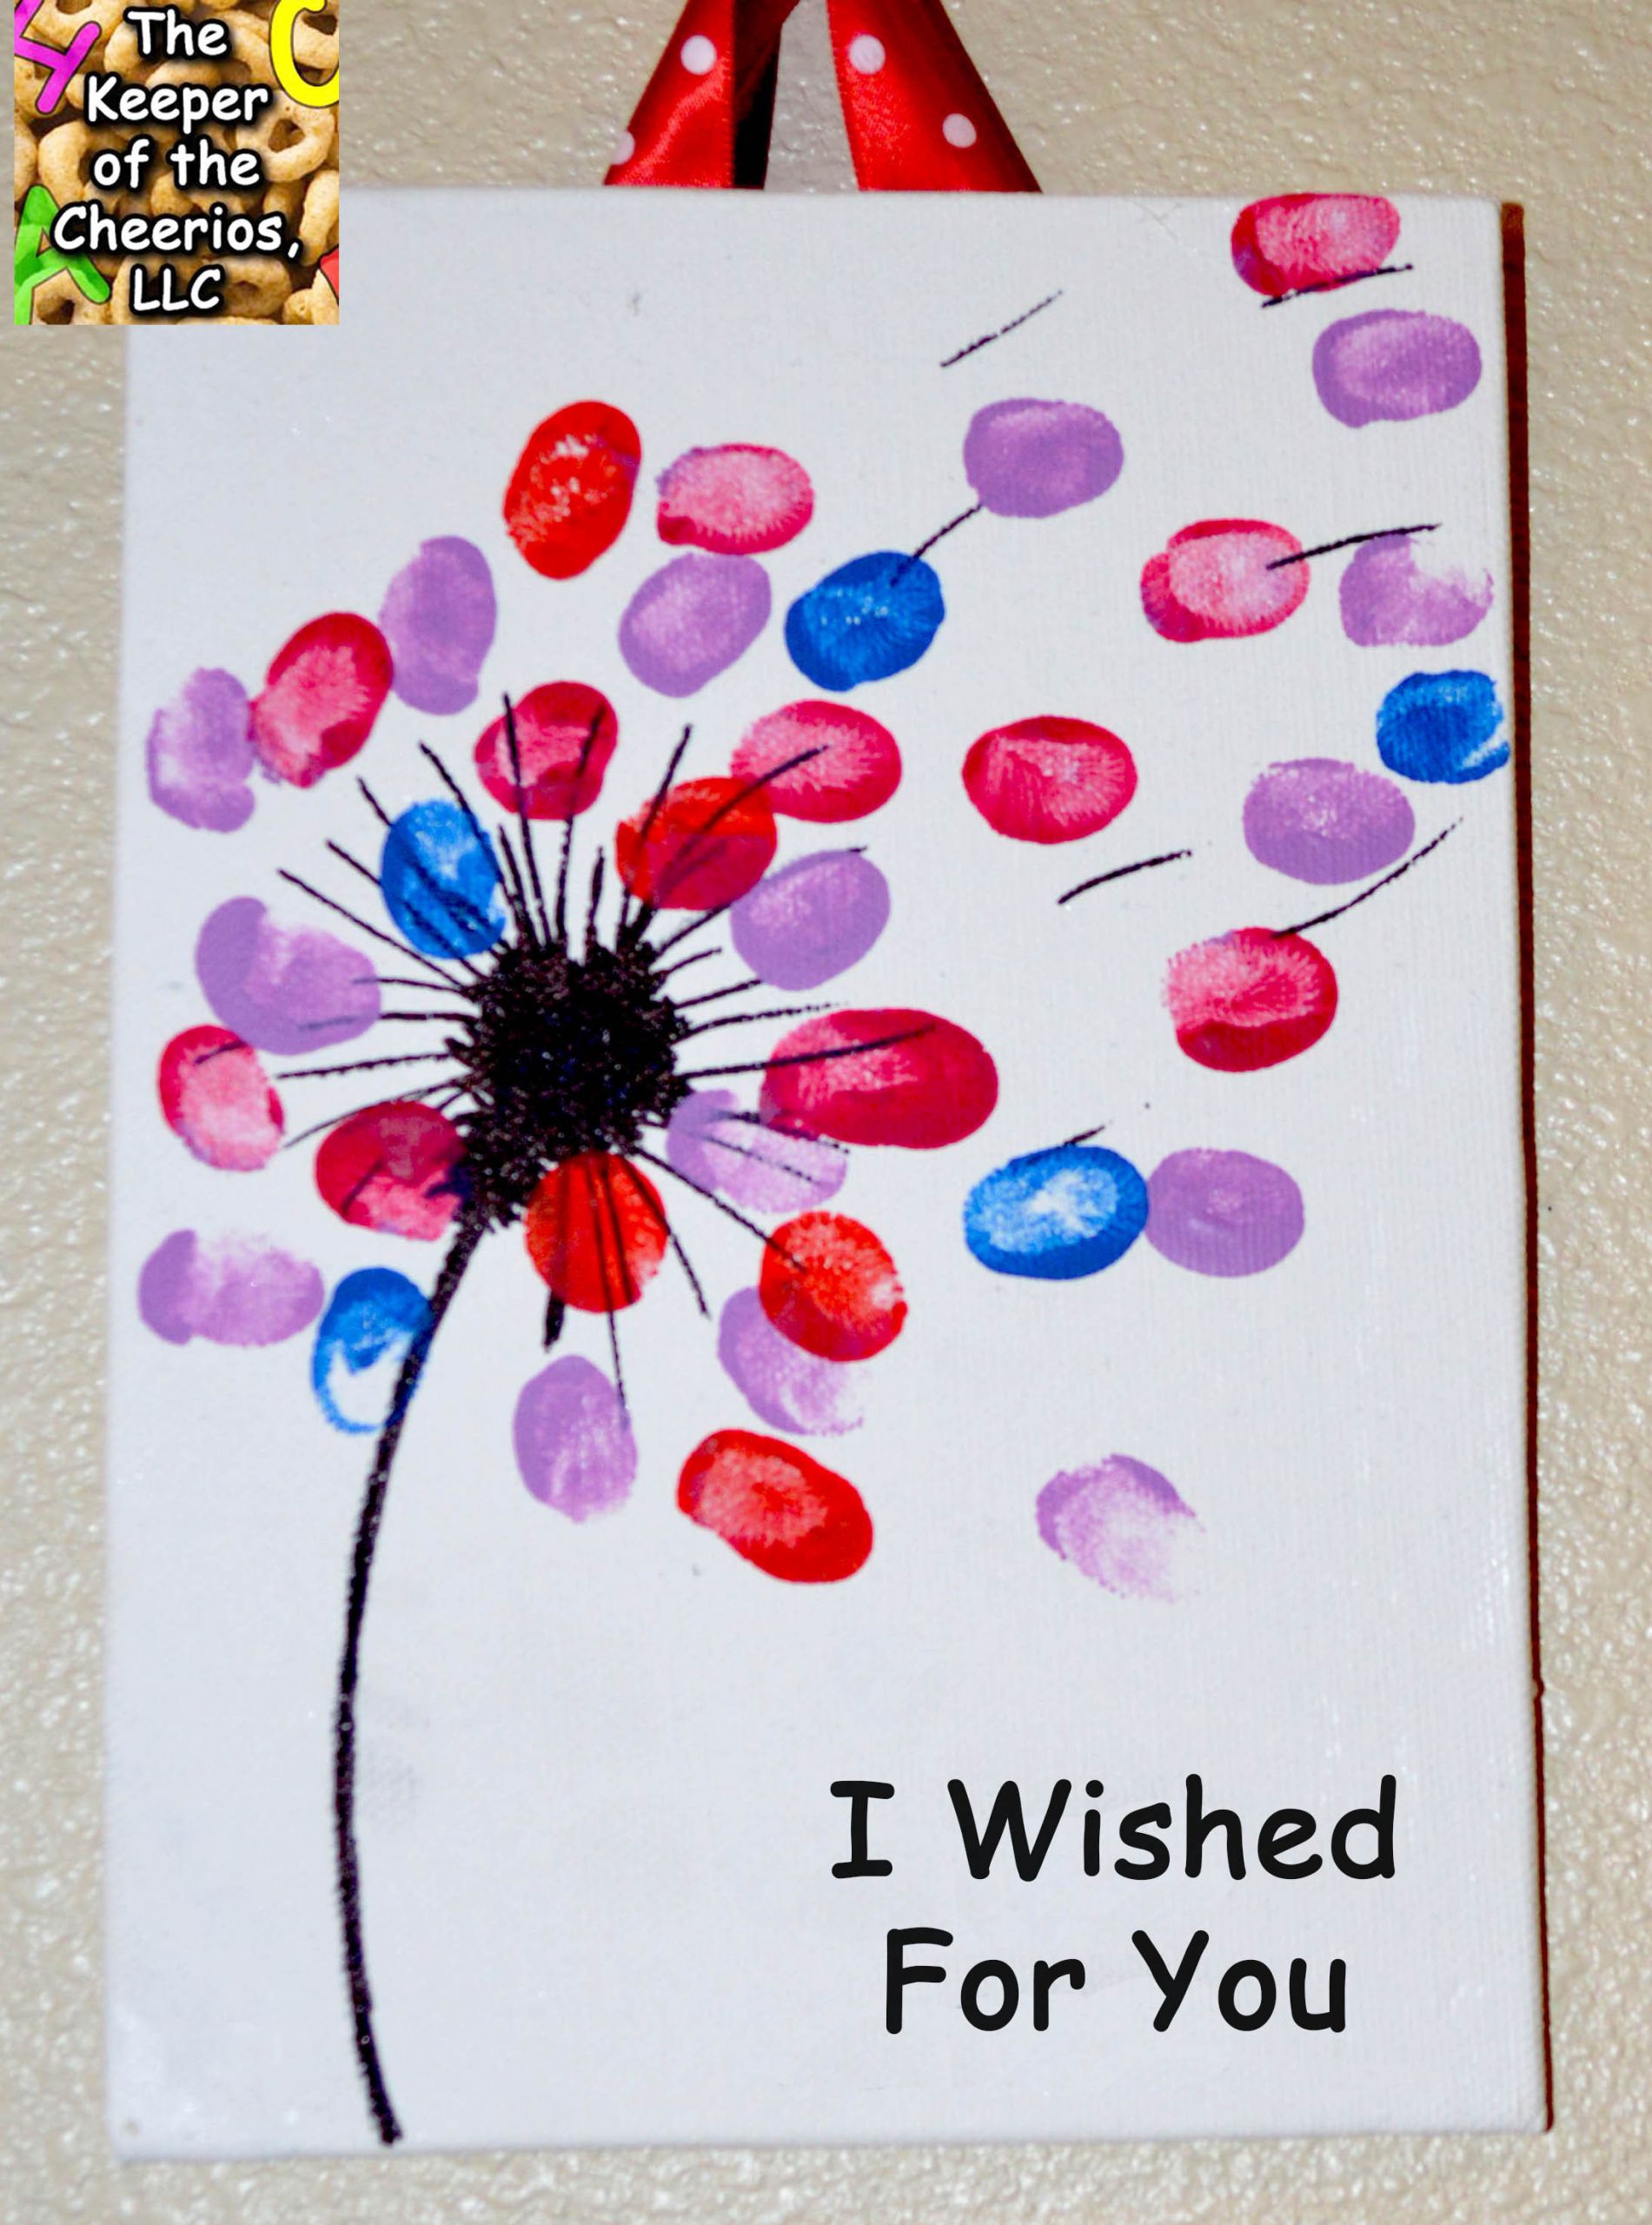 Mother Day Craft Ideas For Kids To Make
 Over 15 Mother s Day Crafts That Kids Can Make for Gifts